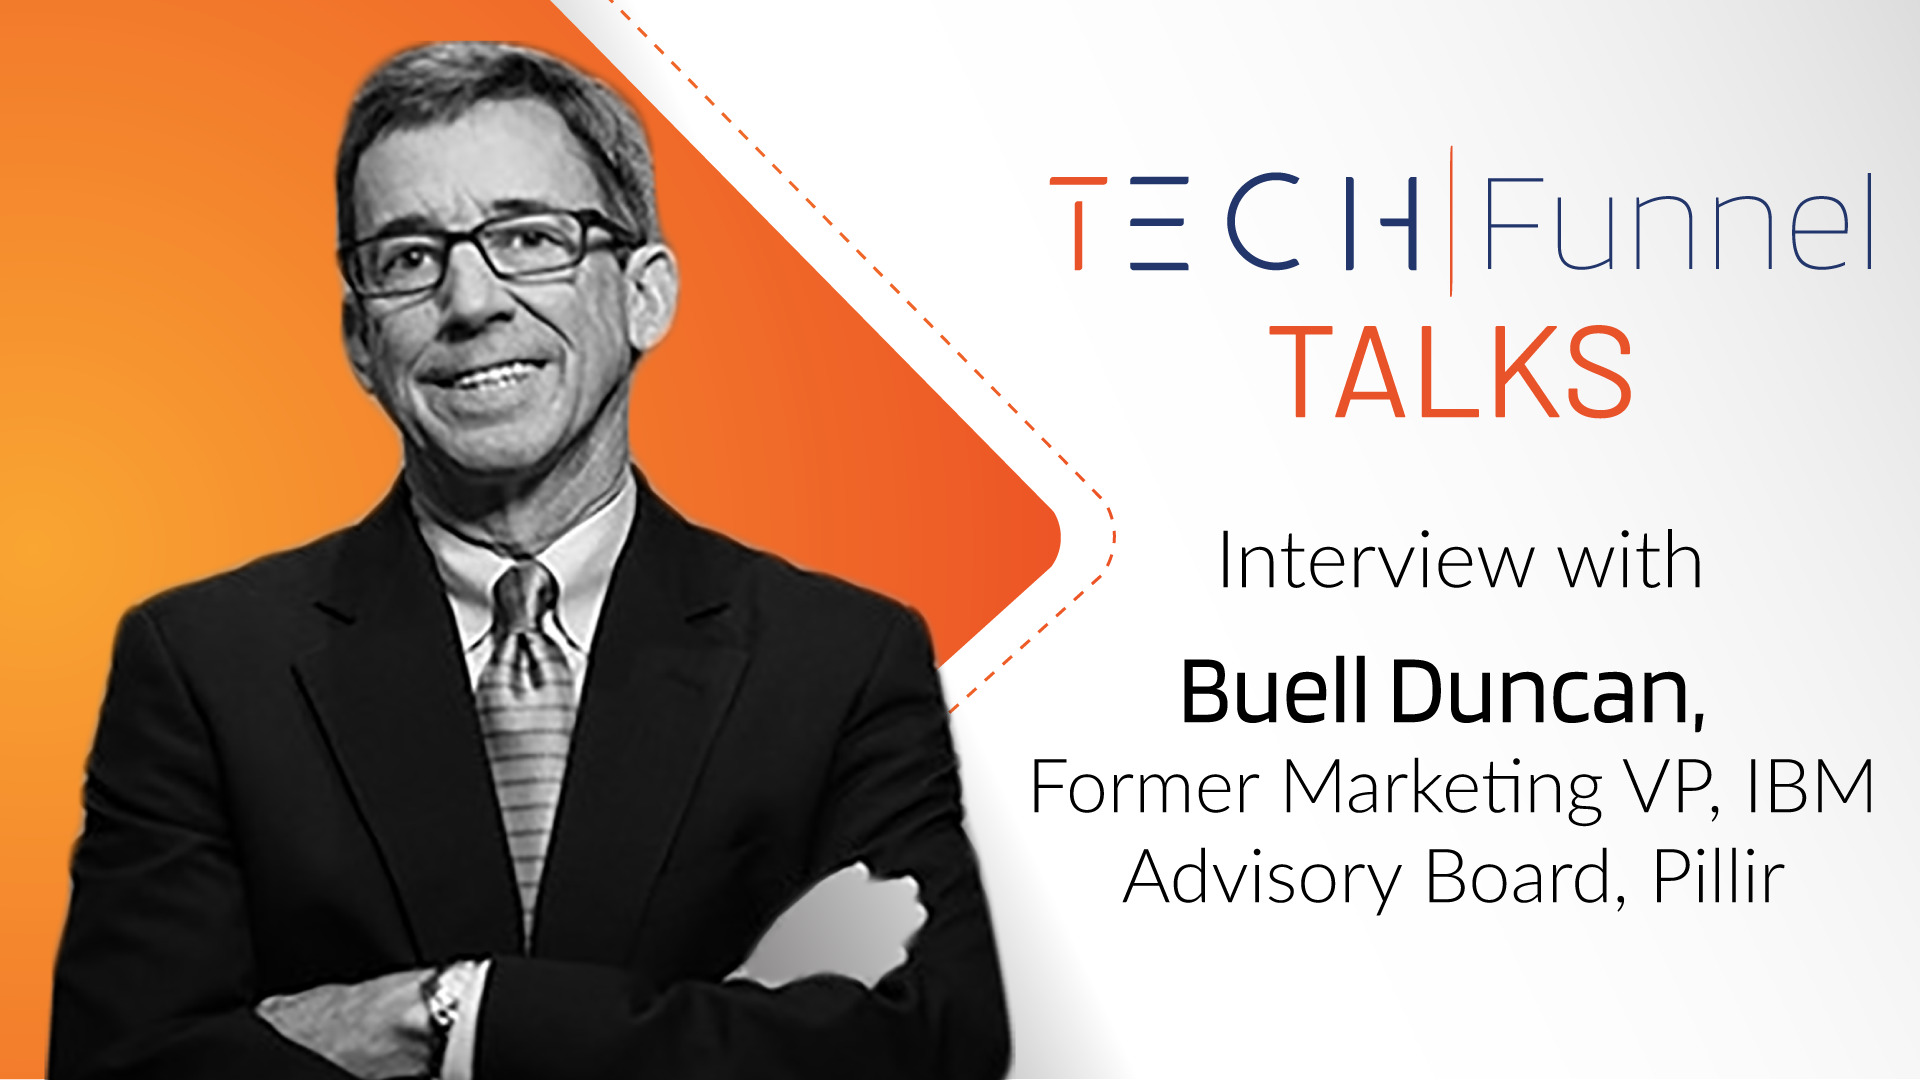 This is a Interview with Buell Duncan, Former VP of Marketing at IBM